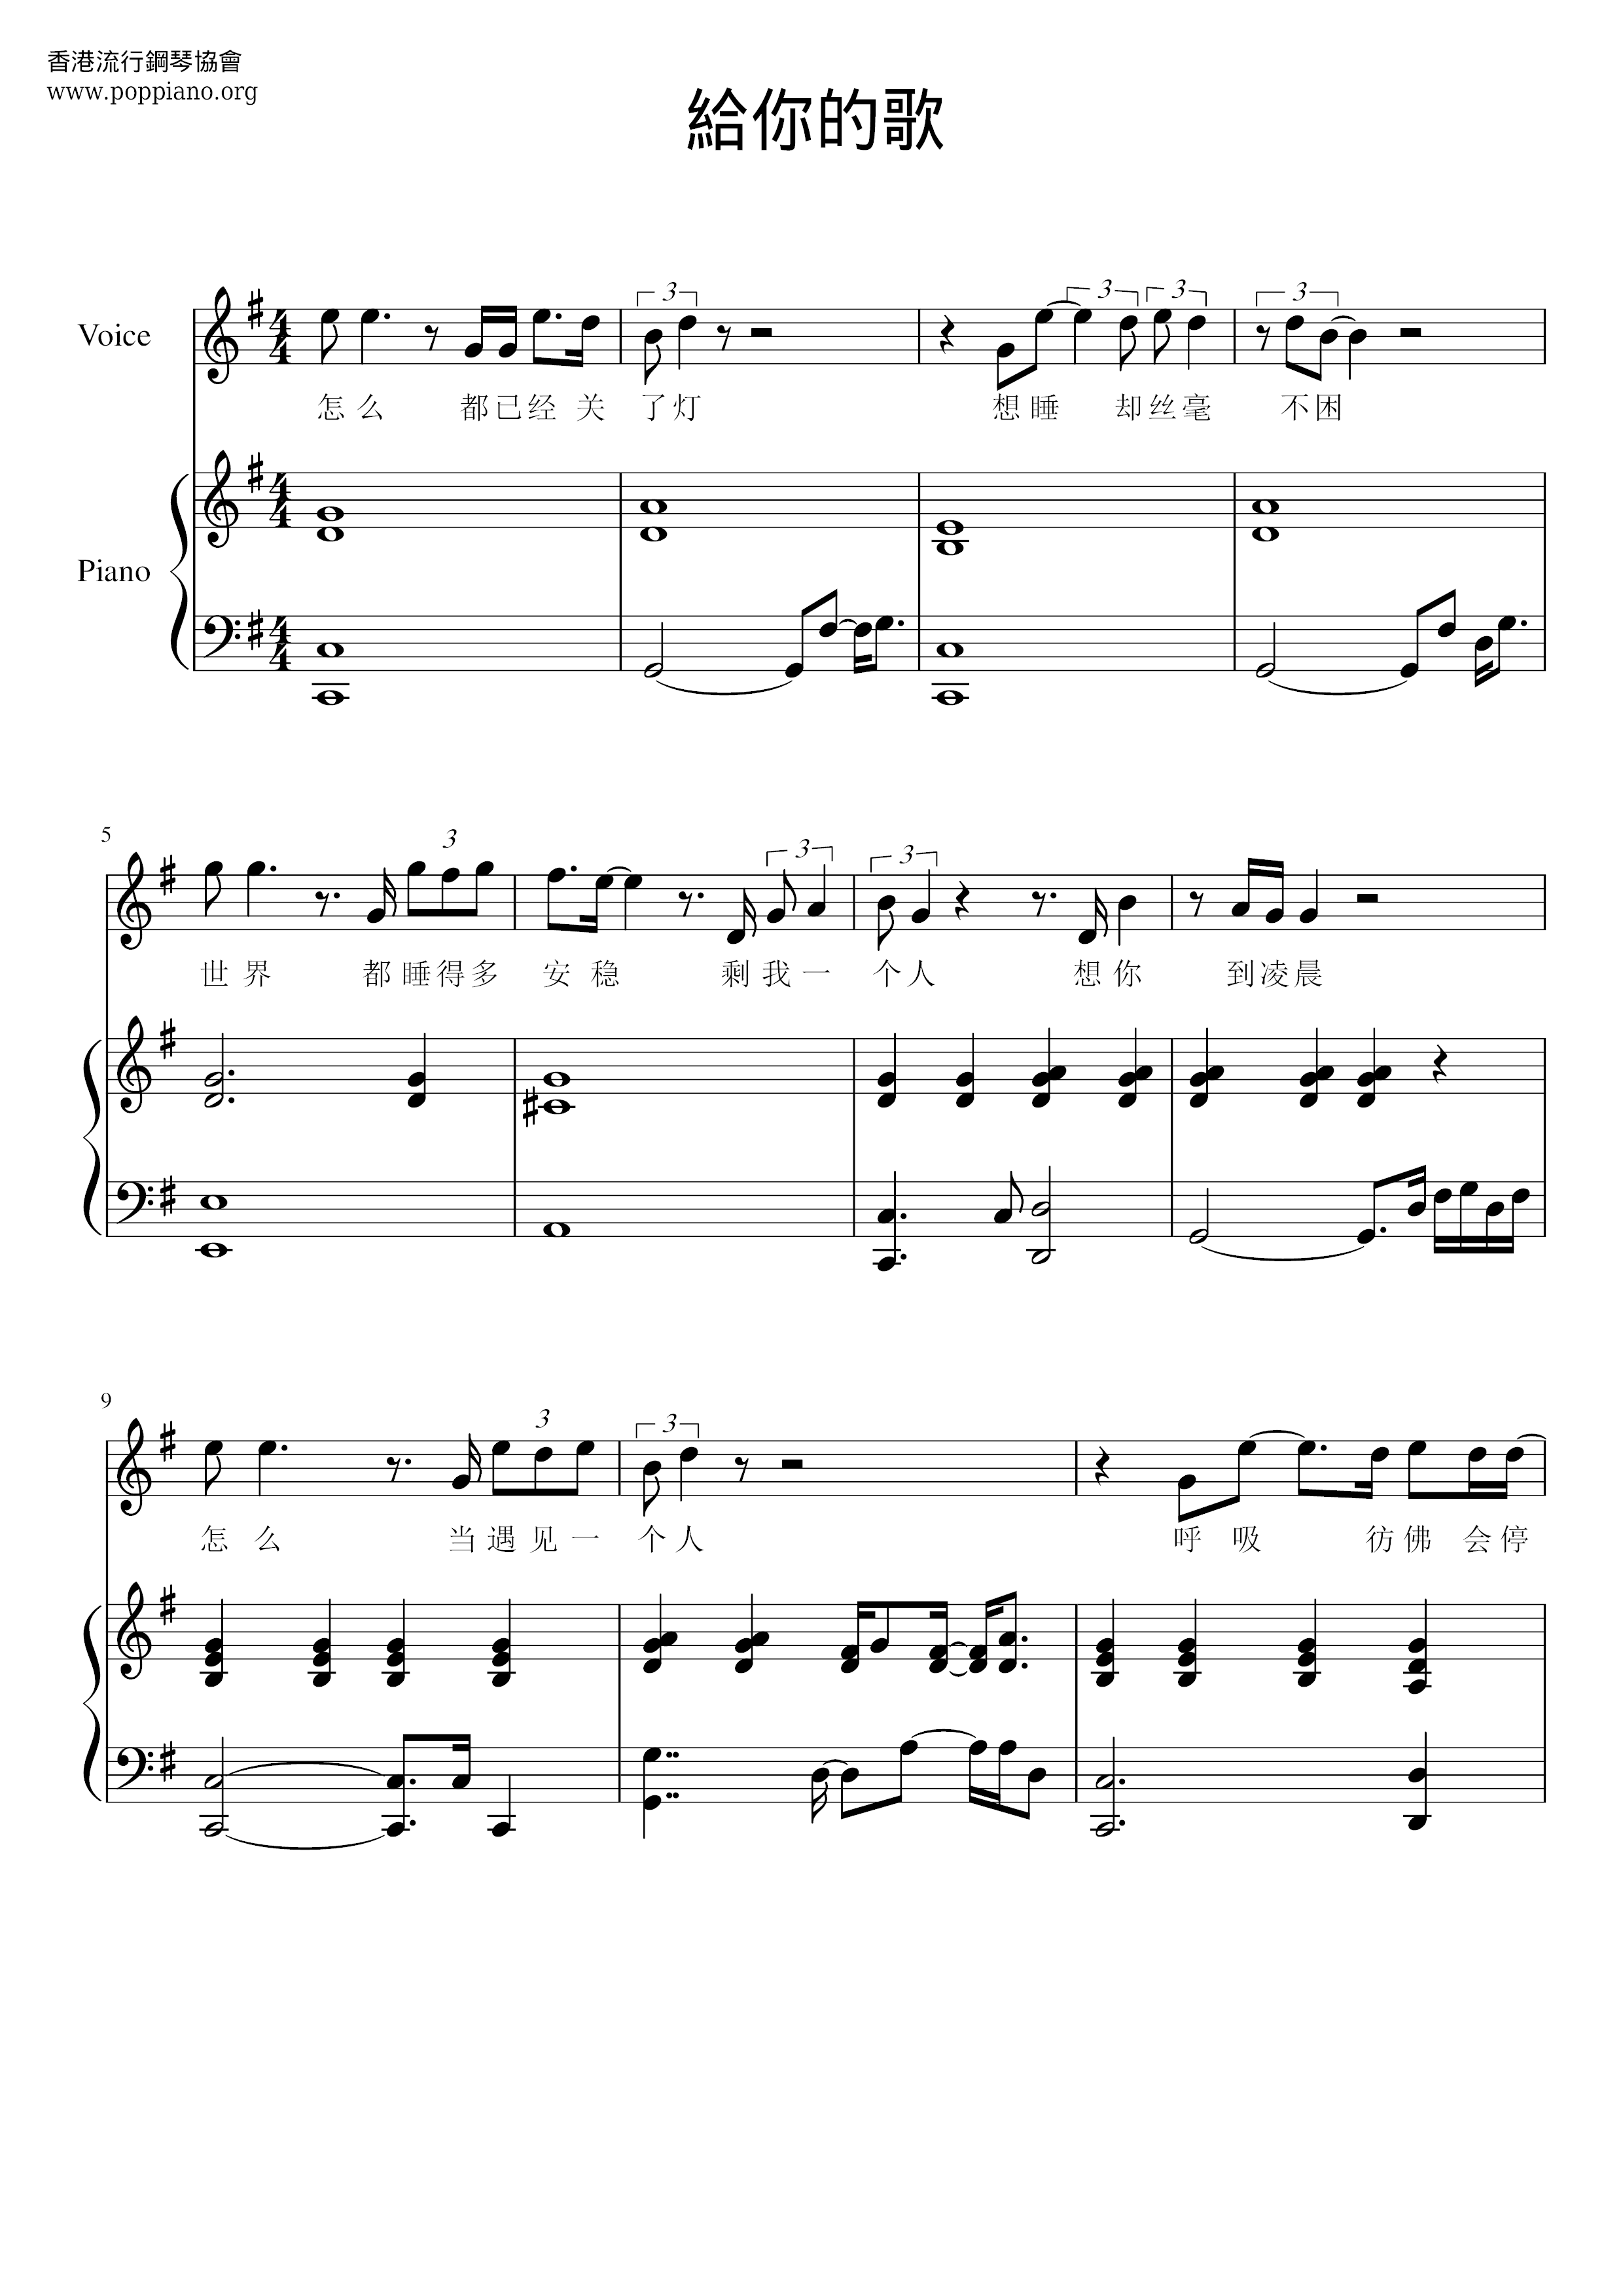 Song For You Score